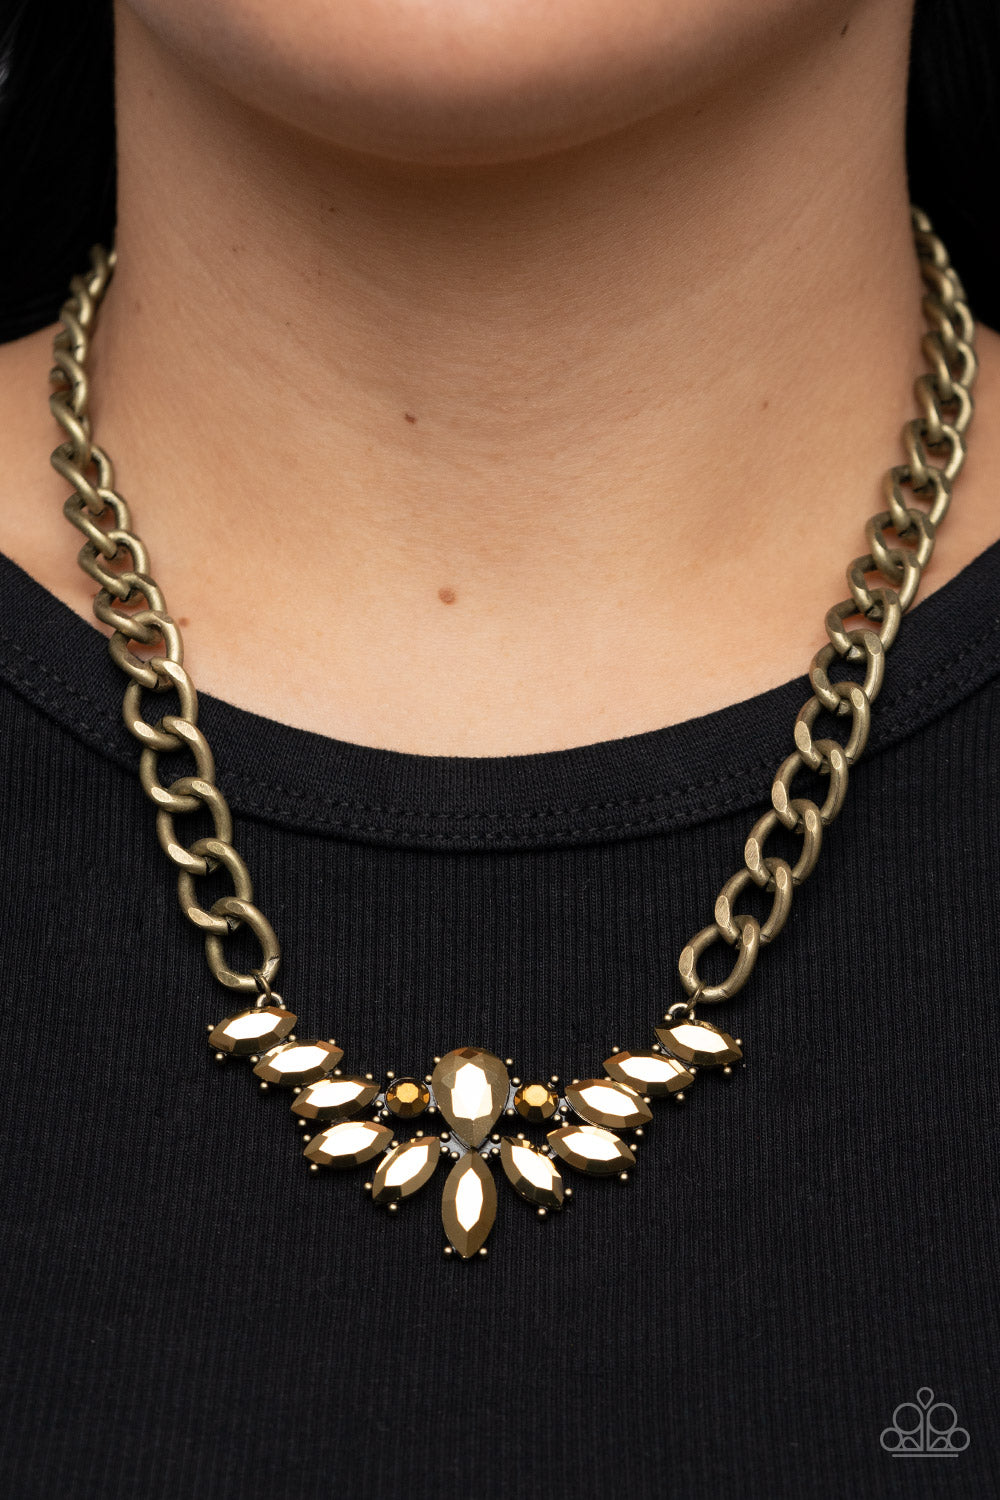 Paparazzi - Come at Me - Brass Necklace